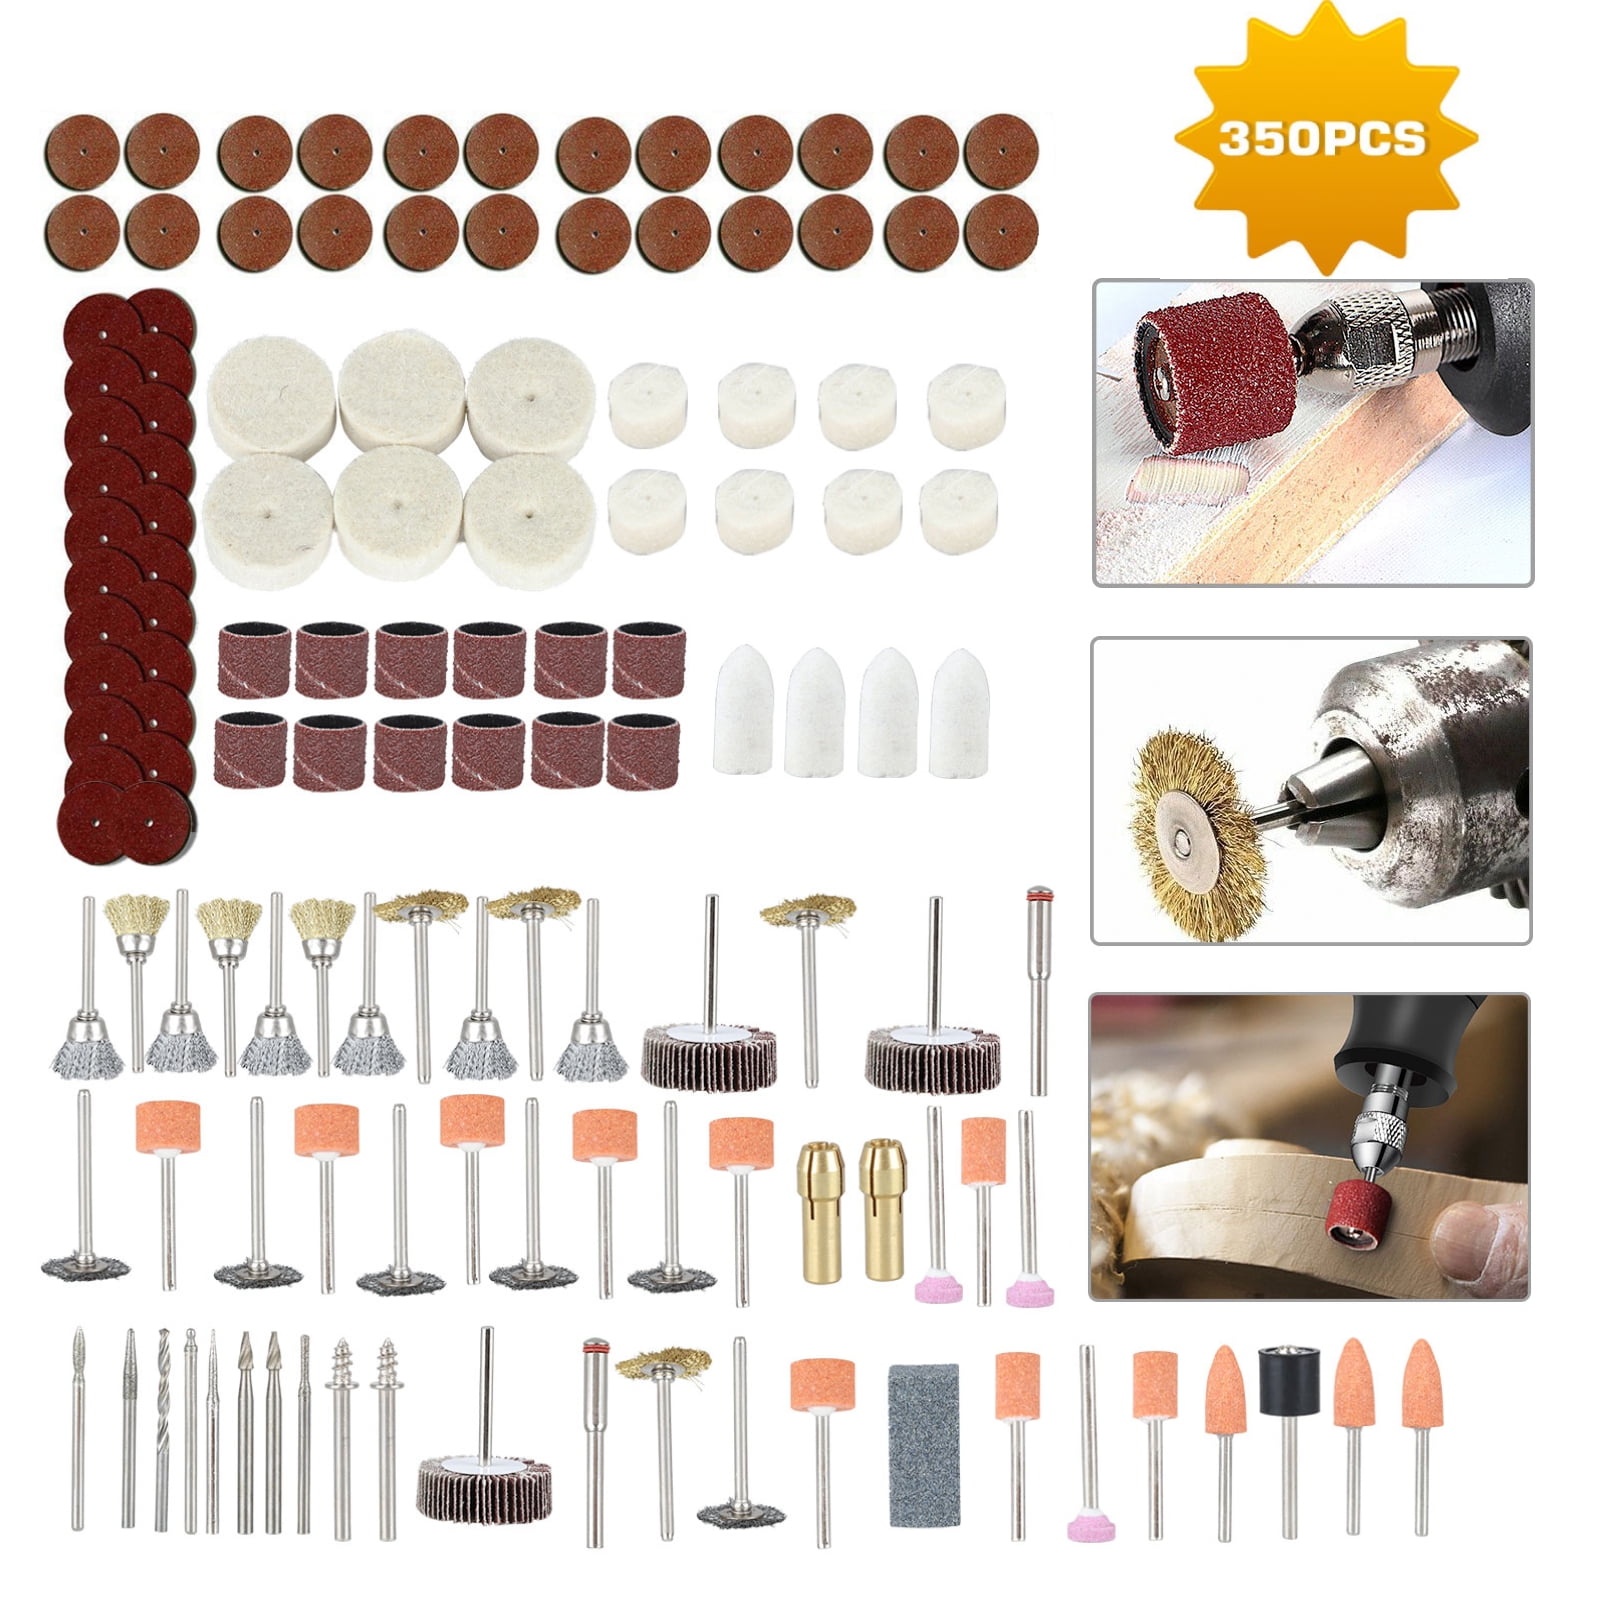 166pcs 1/8 Inch Shank Rotary Accessories Grinding Polishing Cutting Bits Set For 